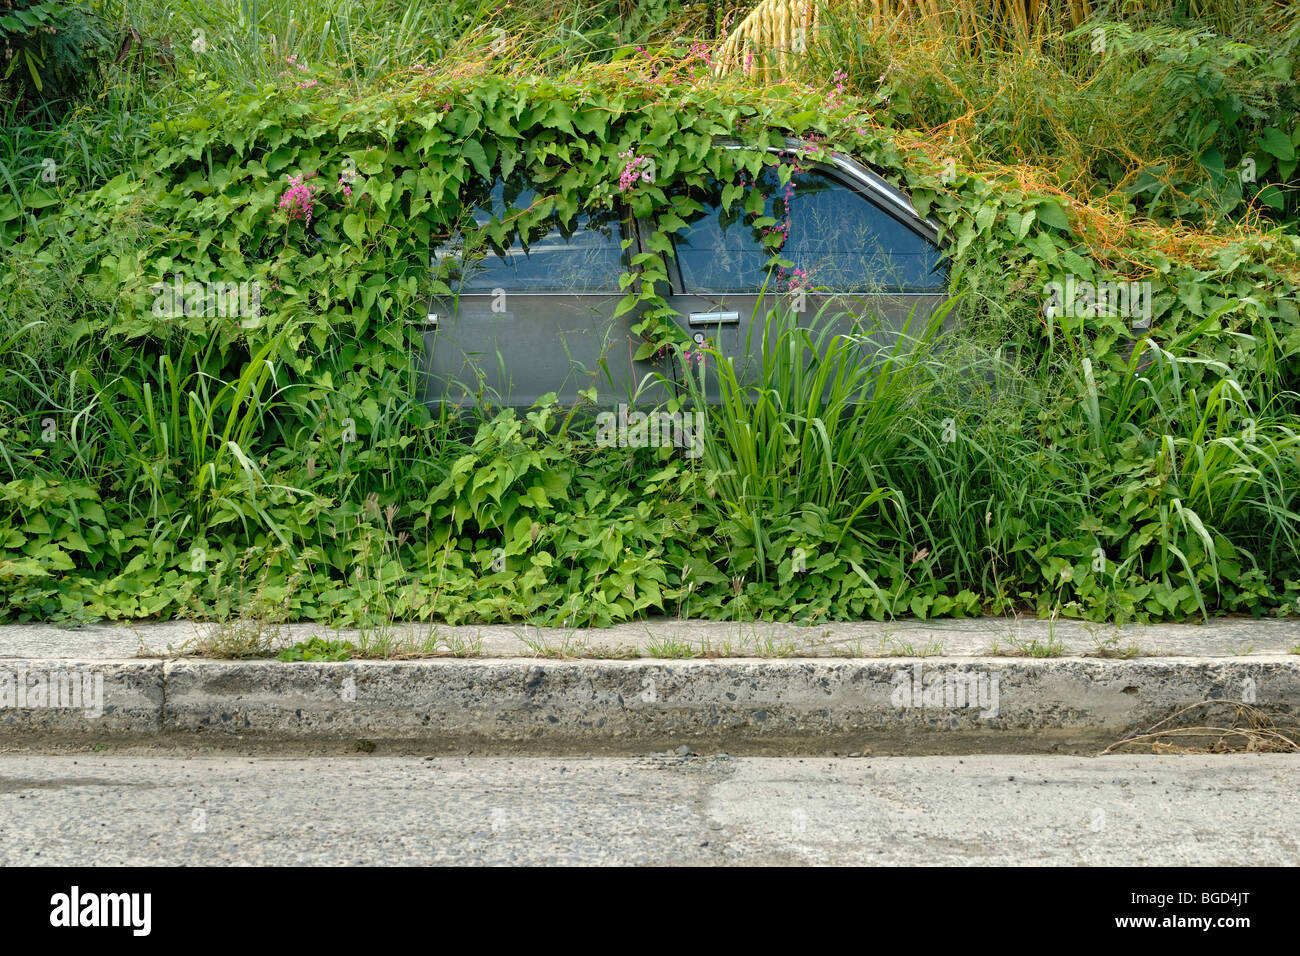 Car overgrown with vines and weeds, Christiansted, St. Croix island, U.S. Virgin Islands, United States Stock Photo